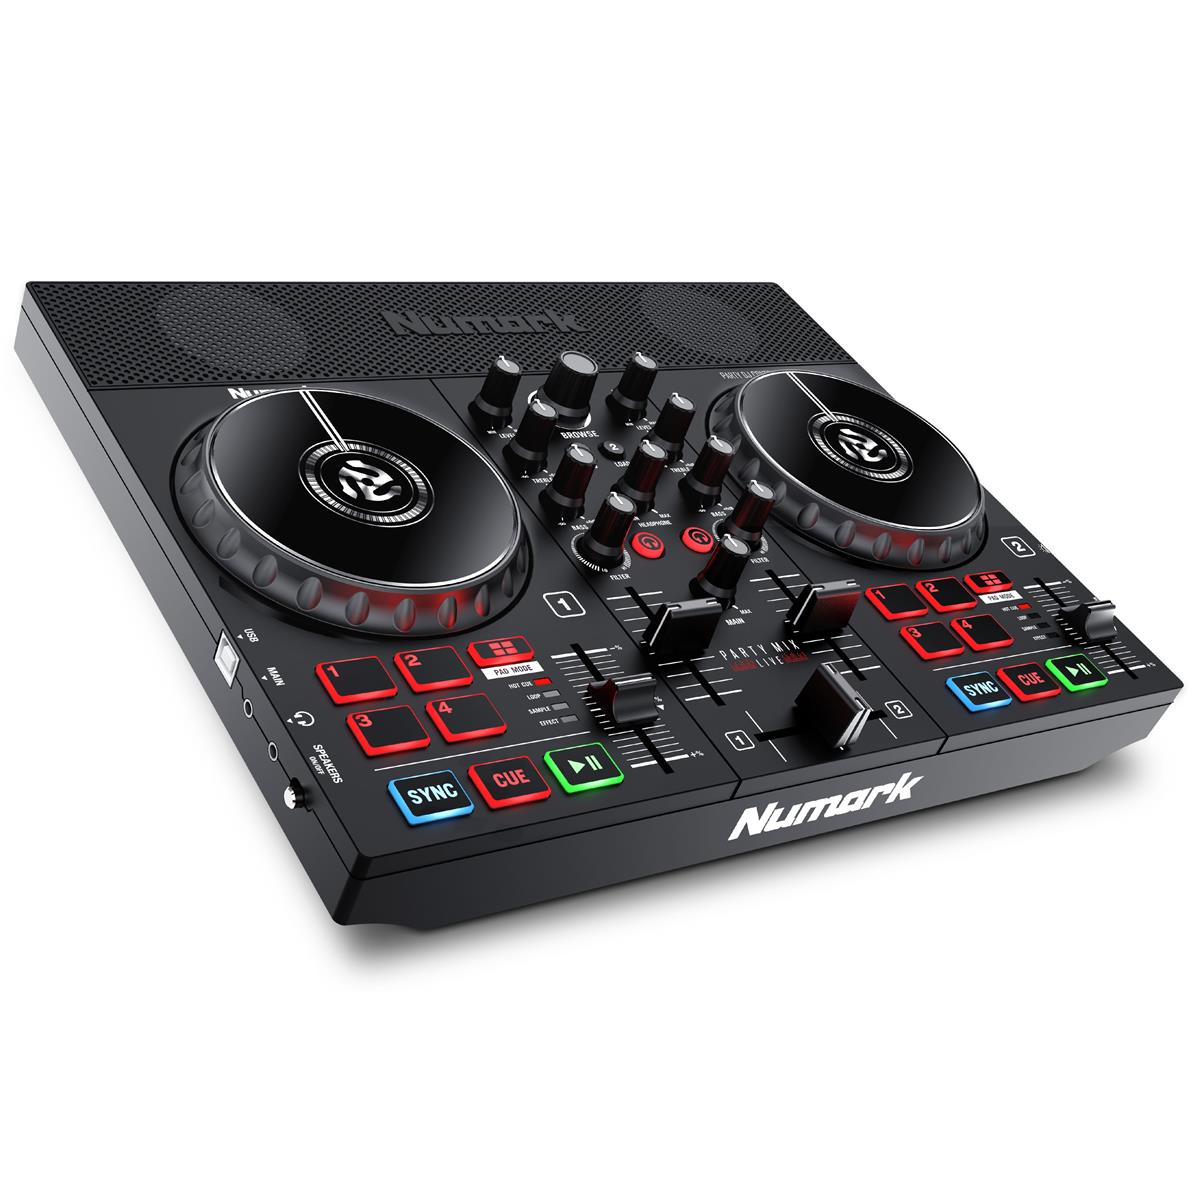 Numark Party Mix Live DJ Controller with Built-In Light Show and Speakers -  PARTYMIXLIVEXUS